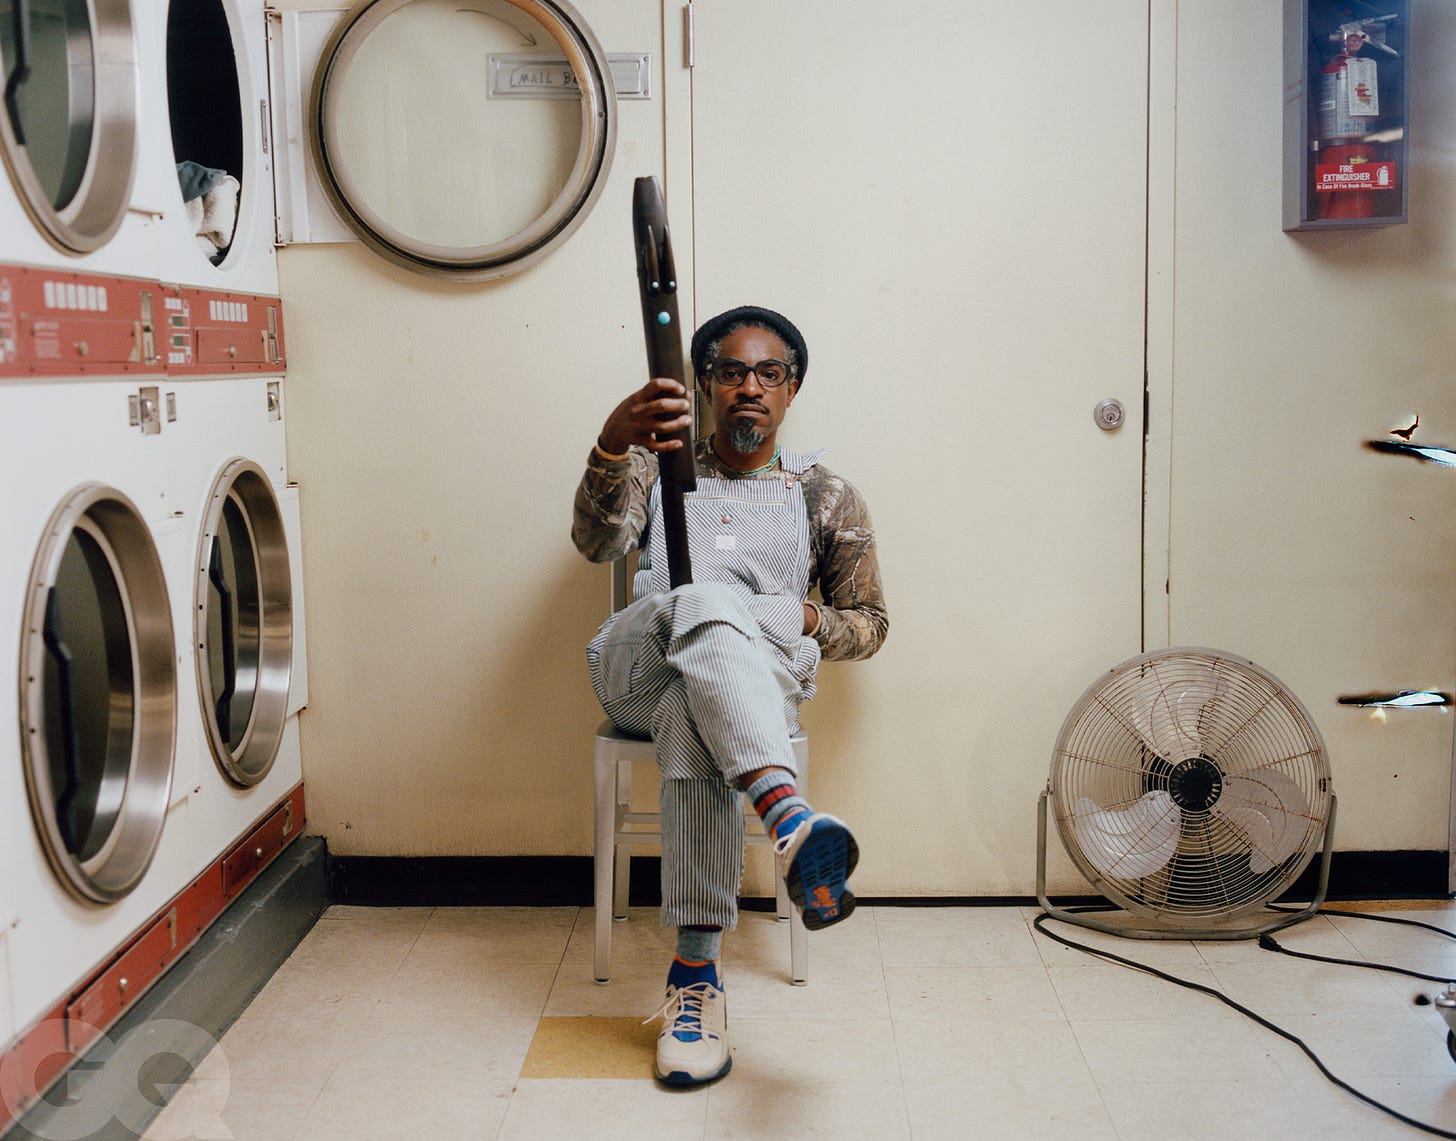 Andre 3000 in striped light blue overalls, with a flue, seated at his laundromat